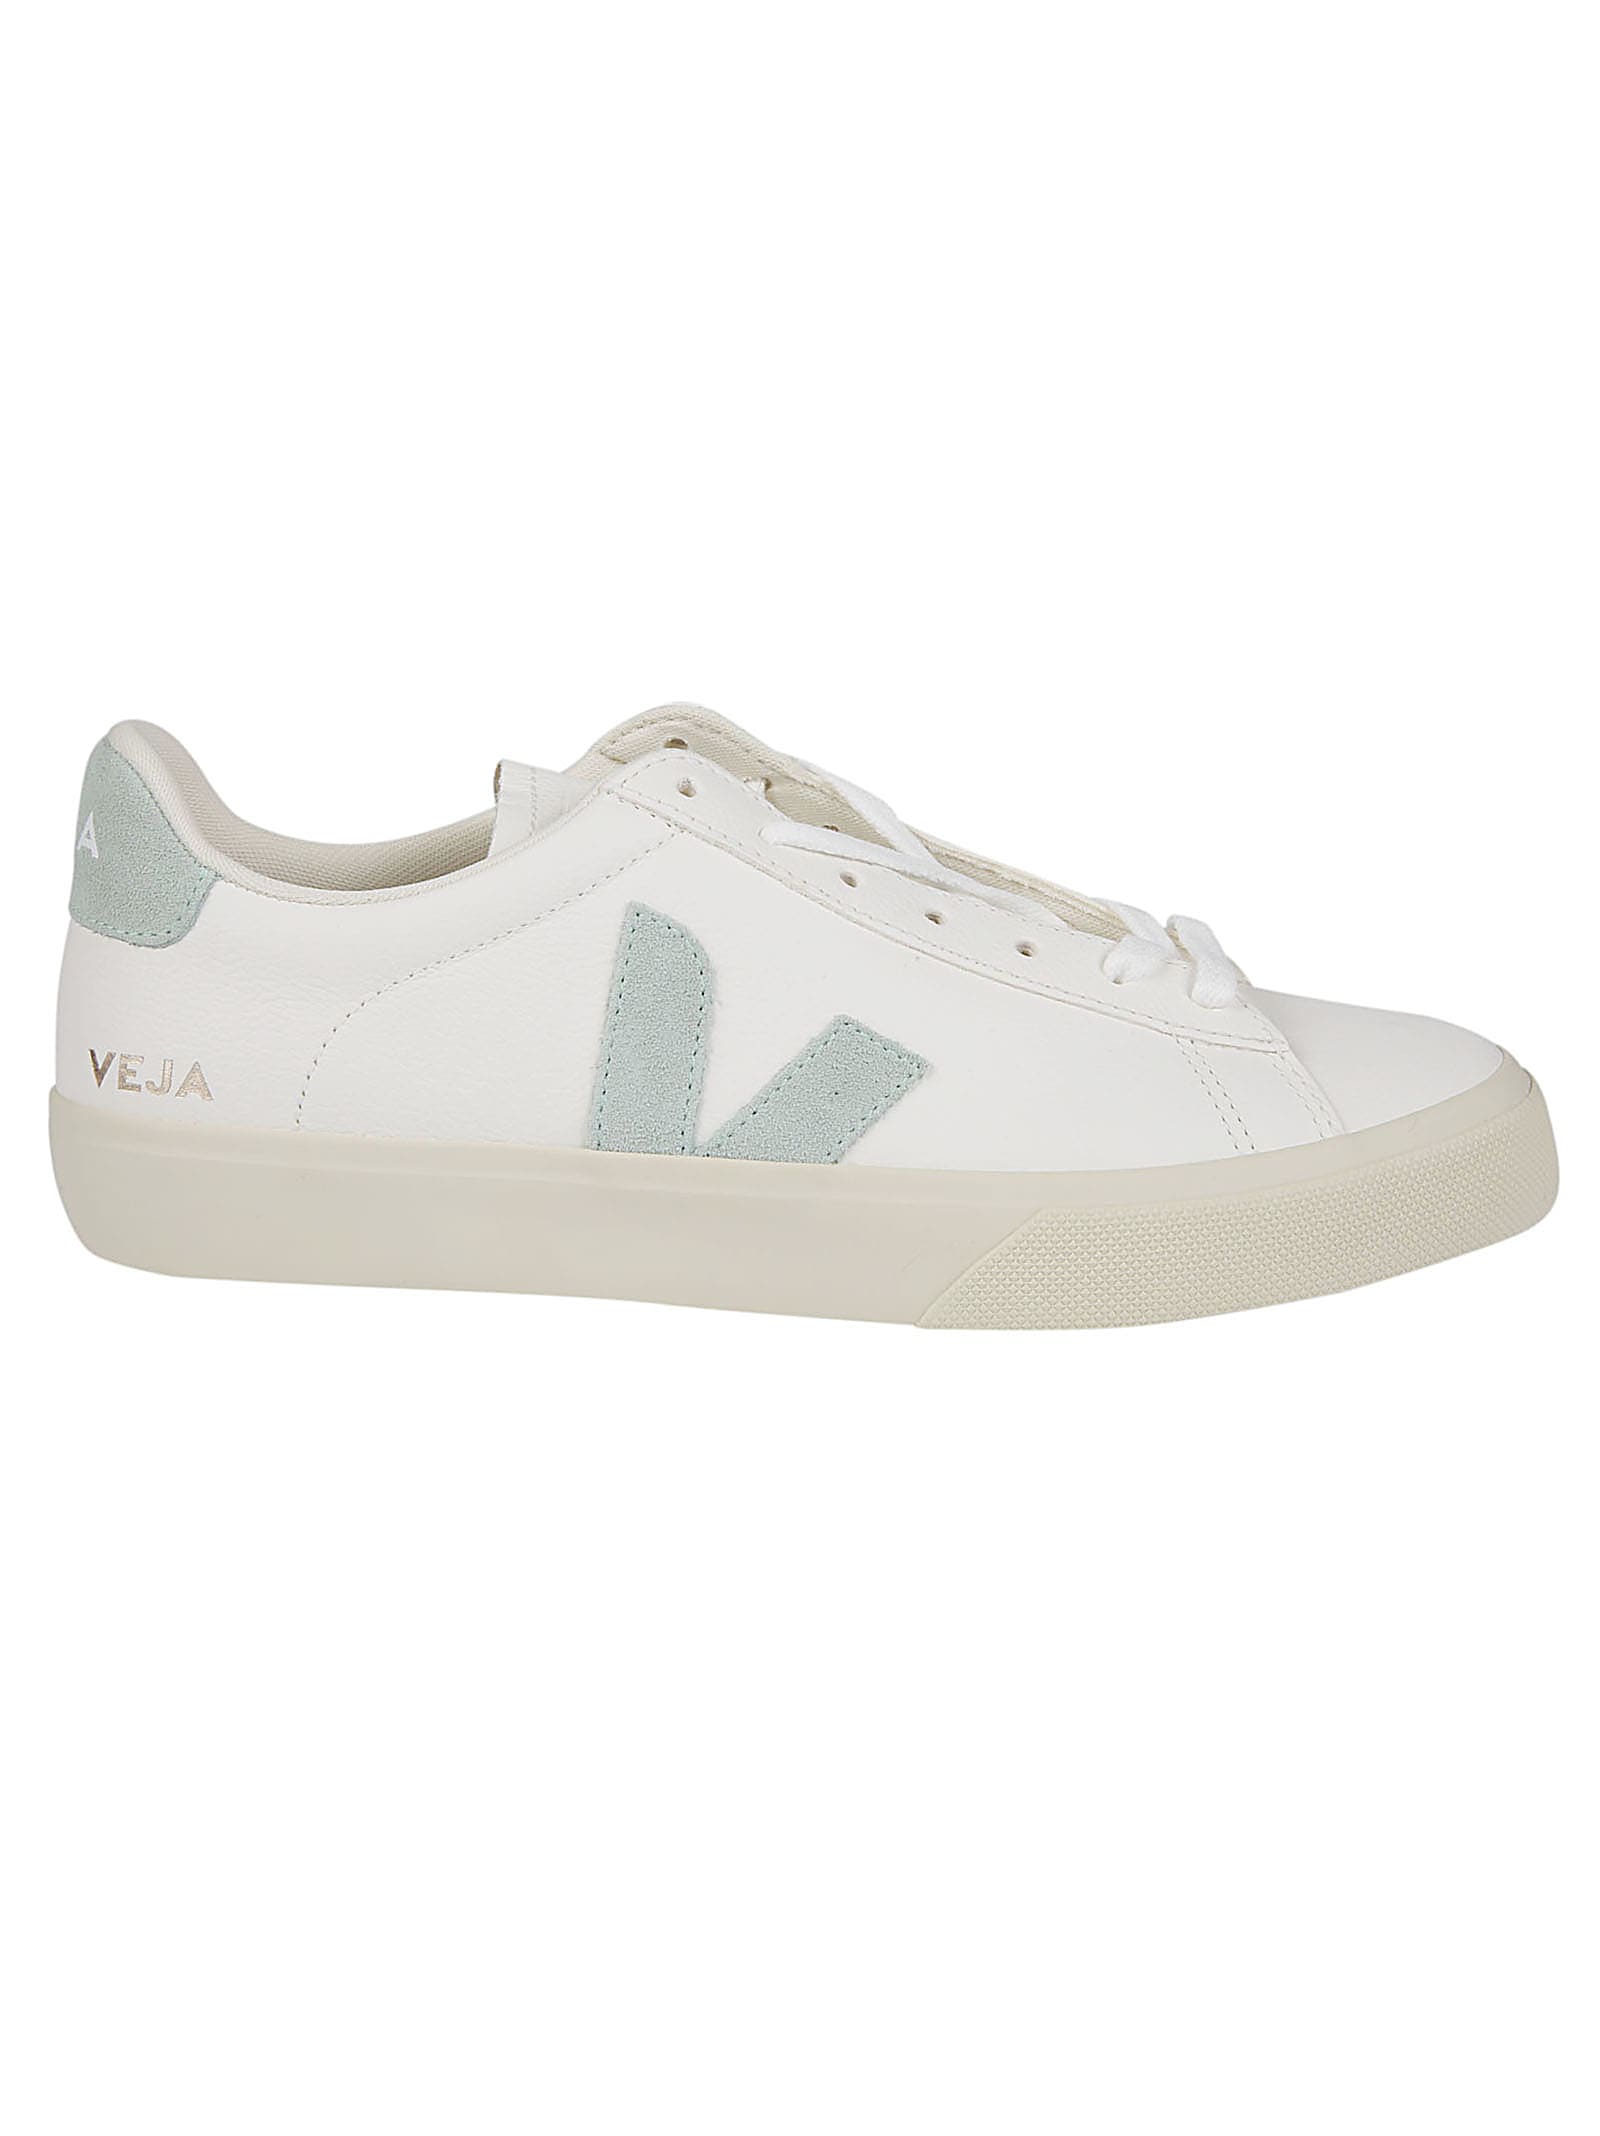 Veja Campo Sneakers In Extra White/macha